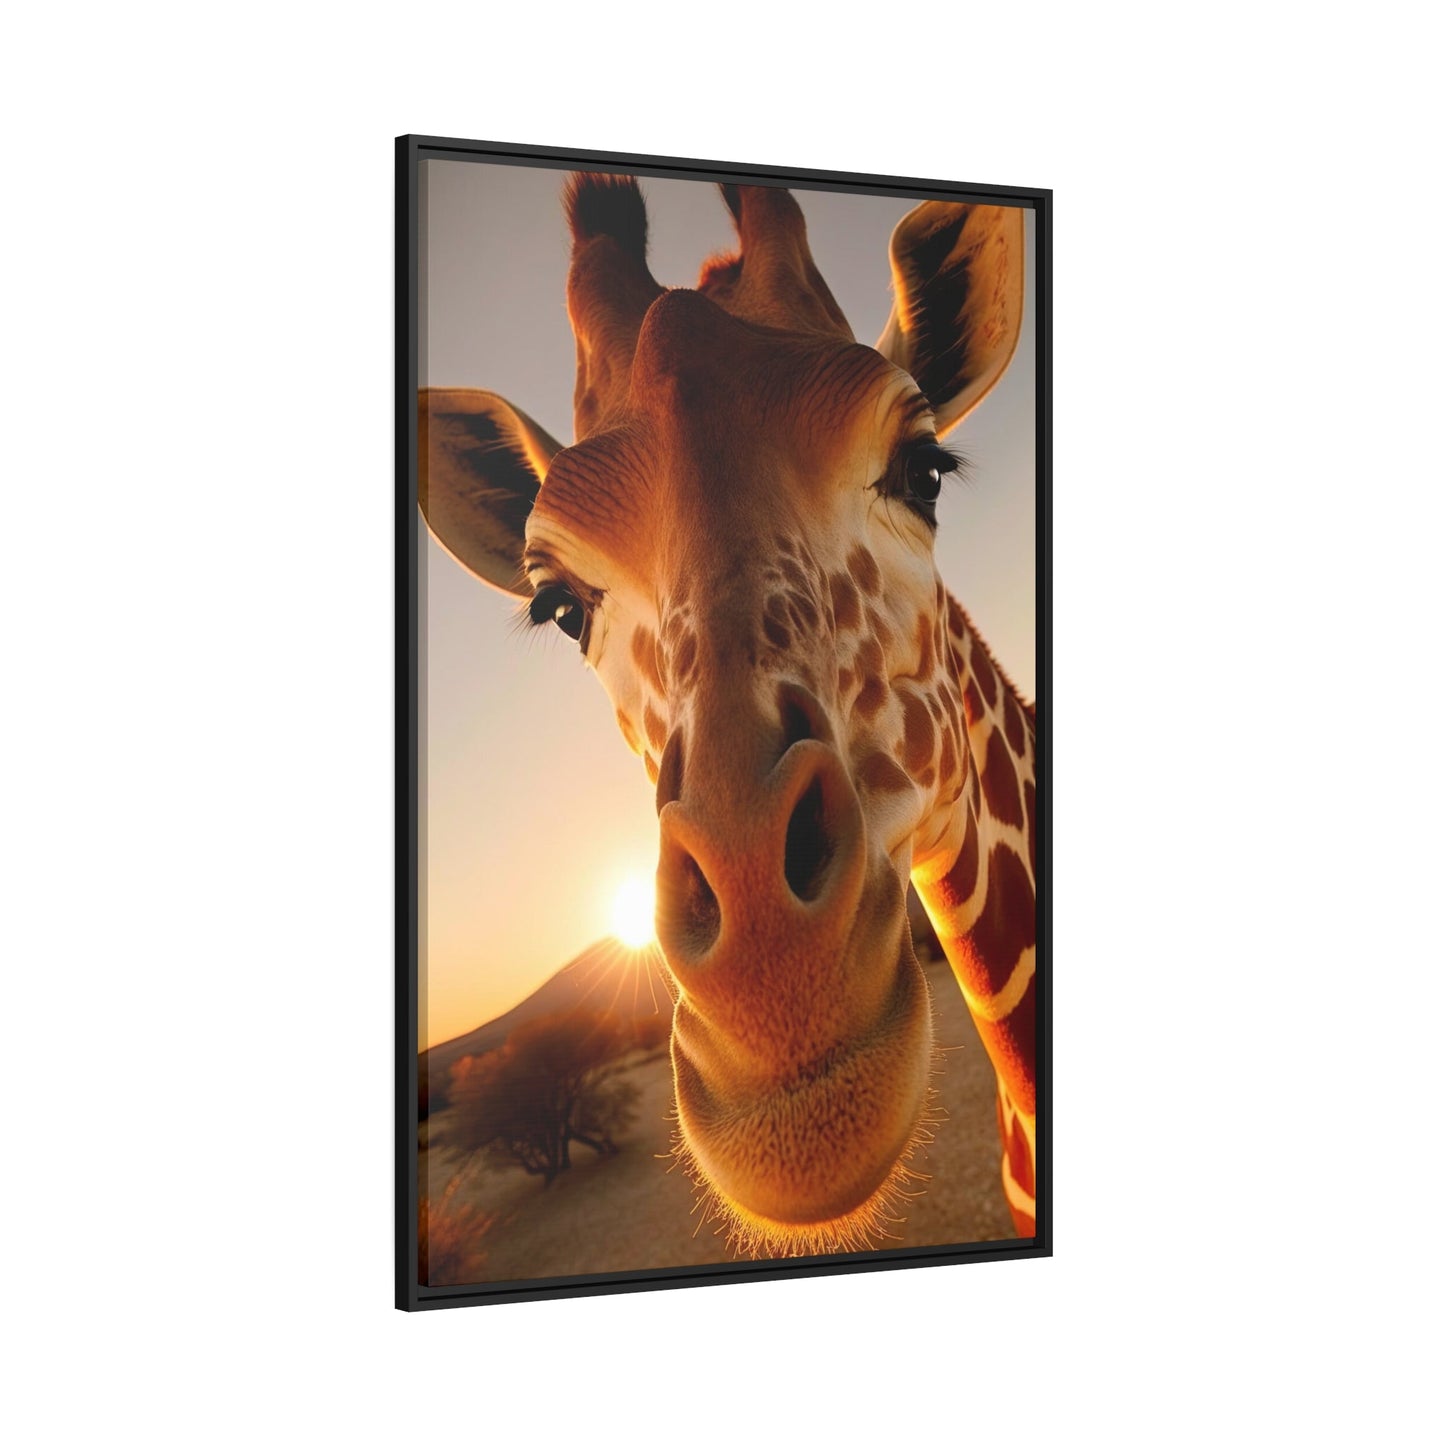 Spotted Wonder: Canvas Wall Art Featuring a Close-Up of a Giraffe's Unique Pattern